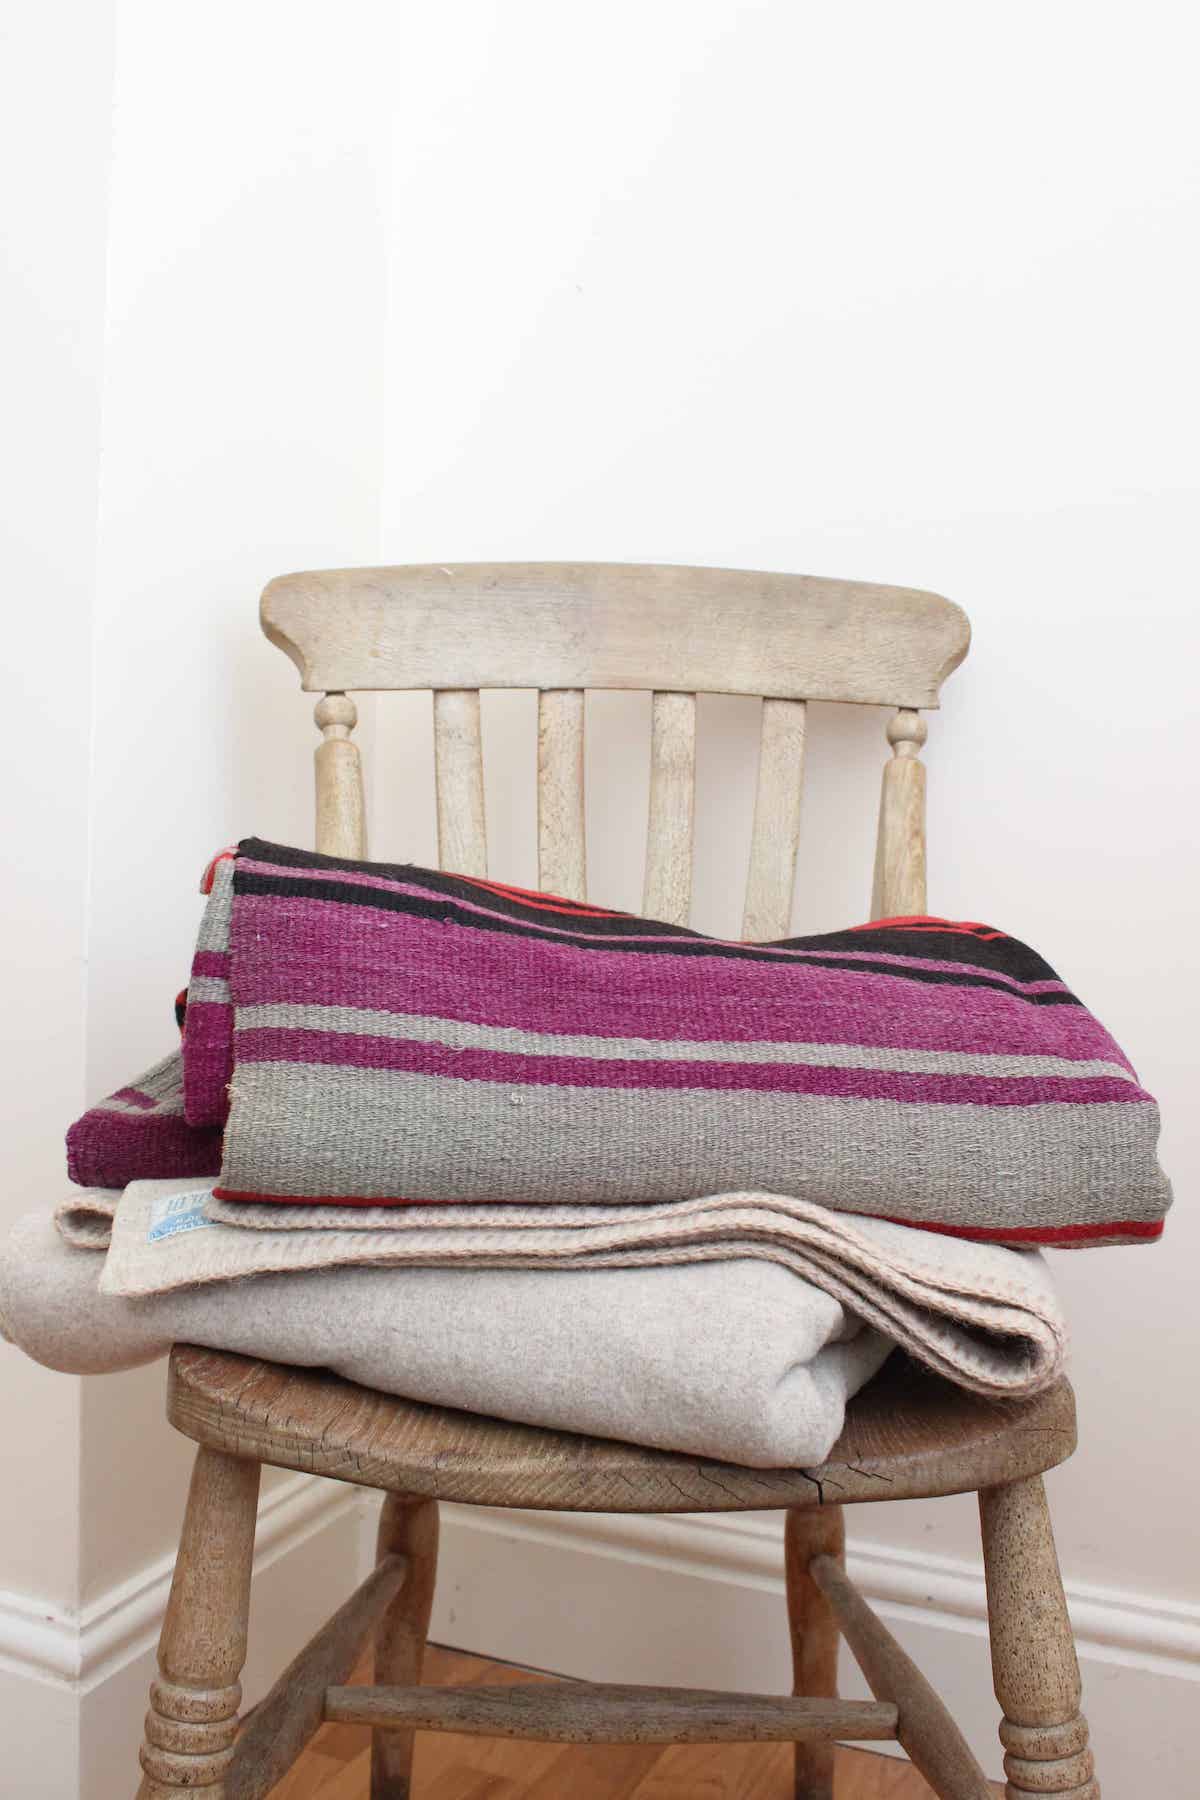 A shot of two wool blankets on a wooden chair.